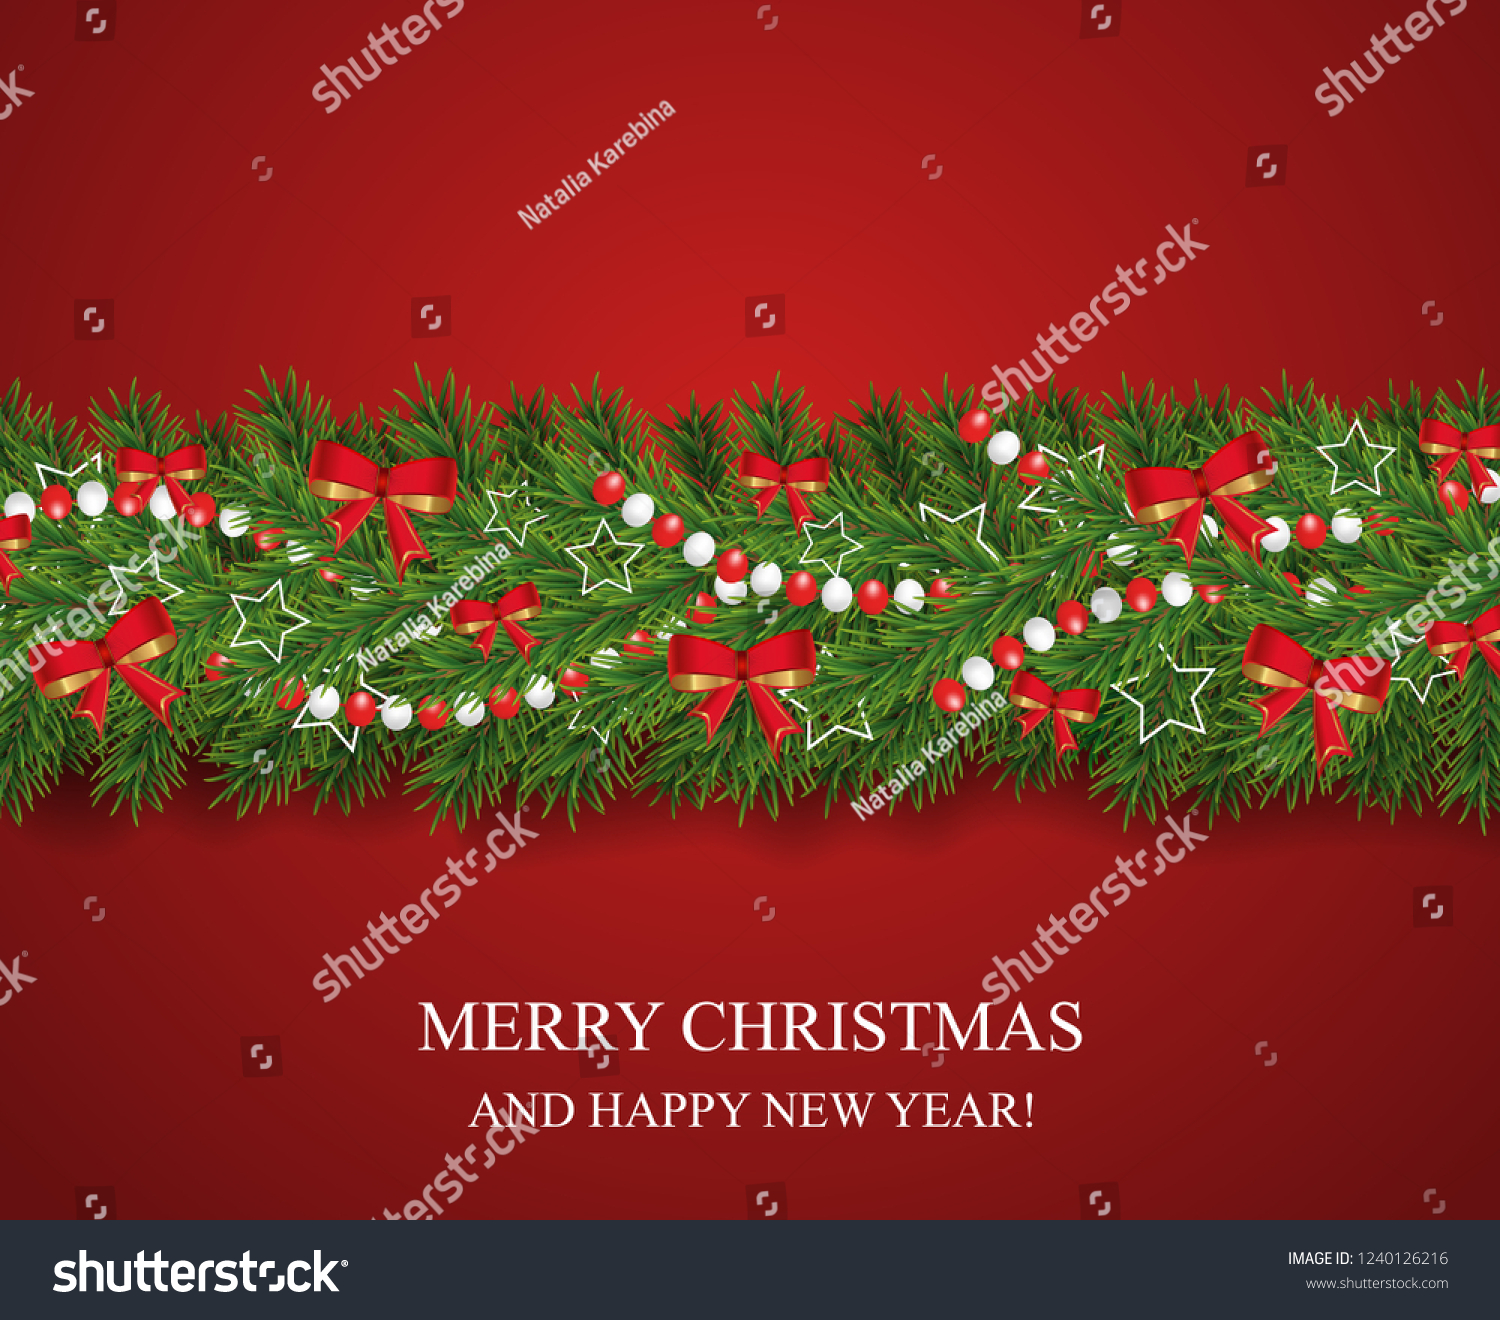 Christmas and happy New Year garland and border of realistic looking Christmas tree branches decorated with red bows, white stars and beads. Horizontal vector illustration. #1240126216